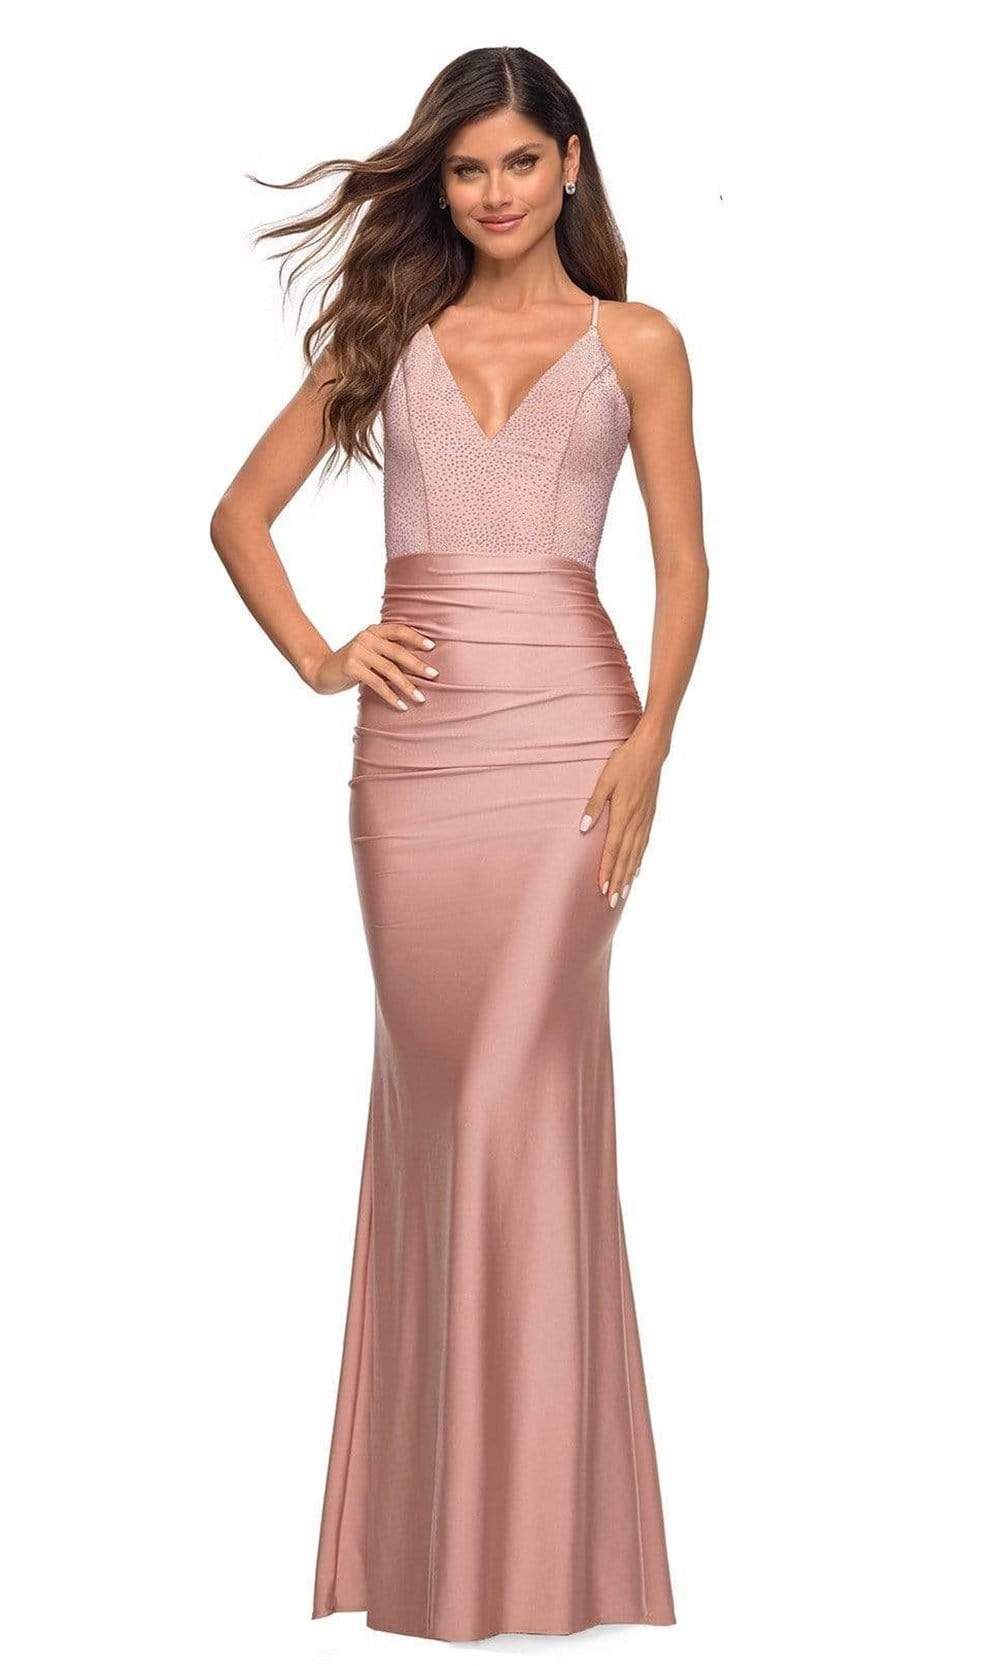 La Femme - 30432 Beaded Plunging V-Neck Gown Special Occasion Dress 00 / Mauve